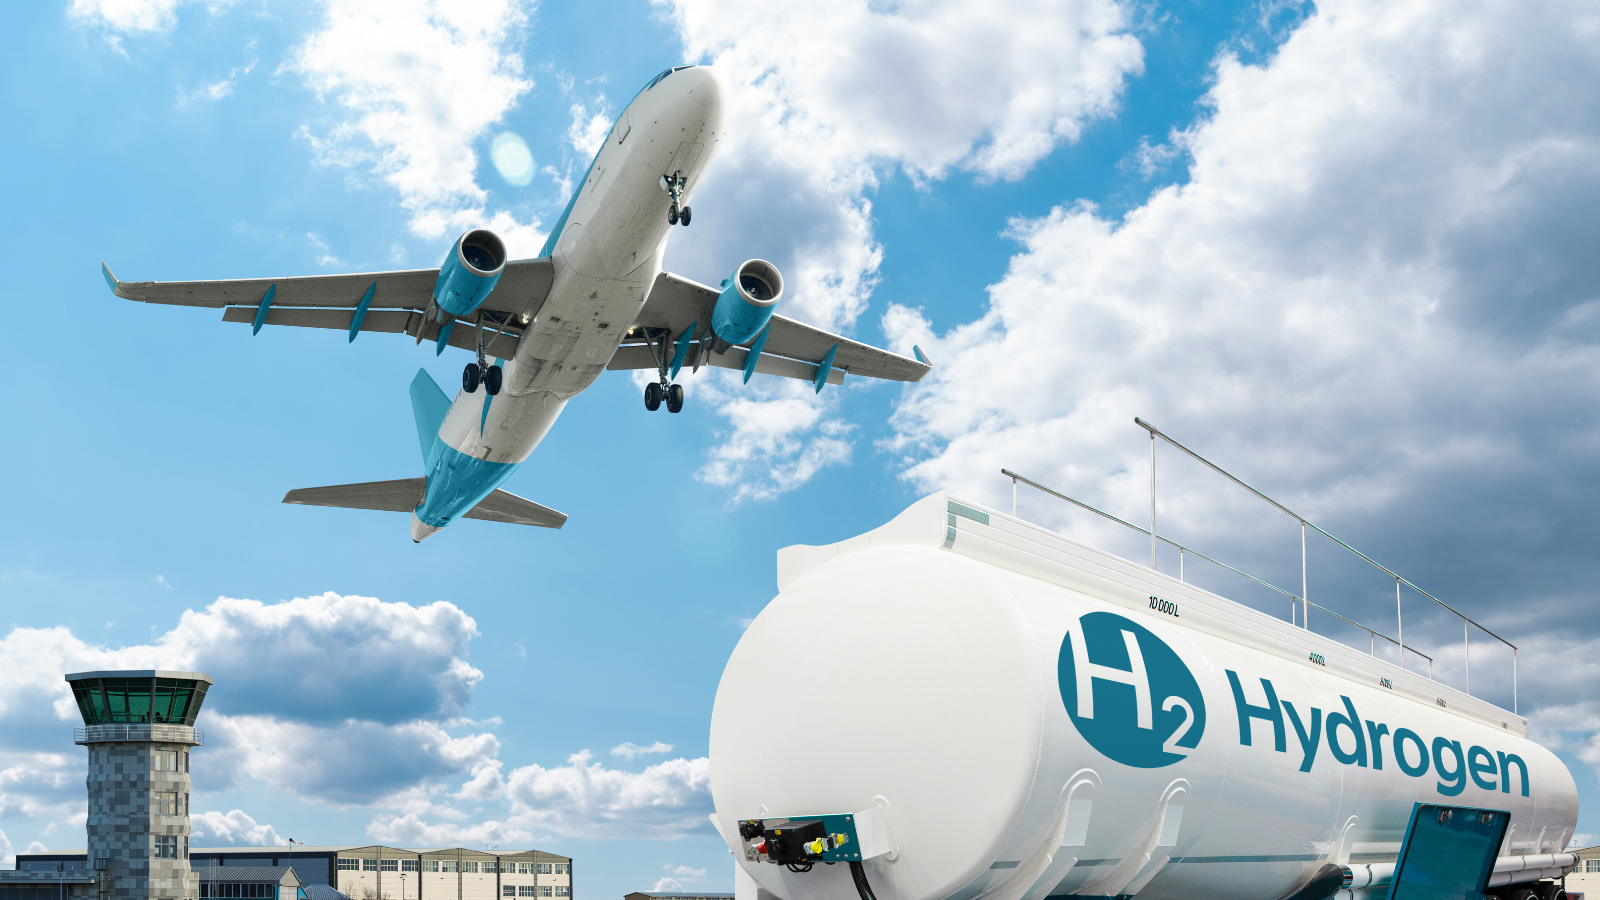 UK Civil Aviation Authority  Launched  Hydrogen Challenge  With  Funding  Of  Nearly  £940,000  From  The  Regulators' Pioneer Fund.